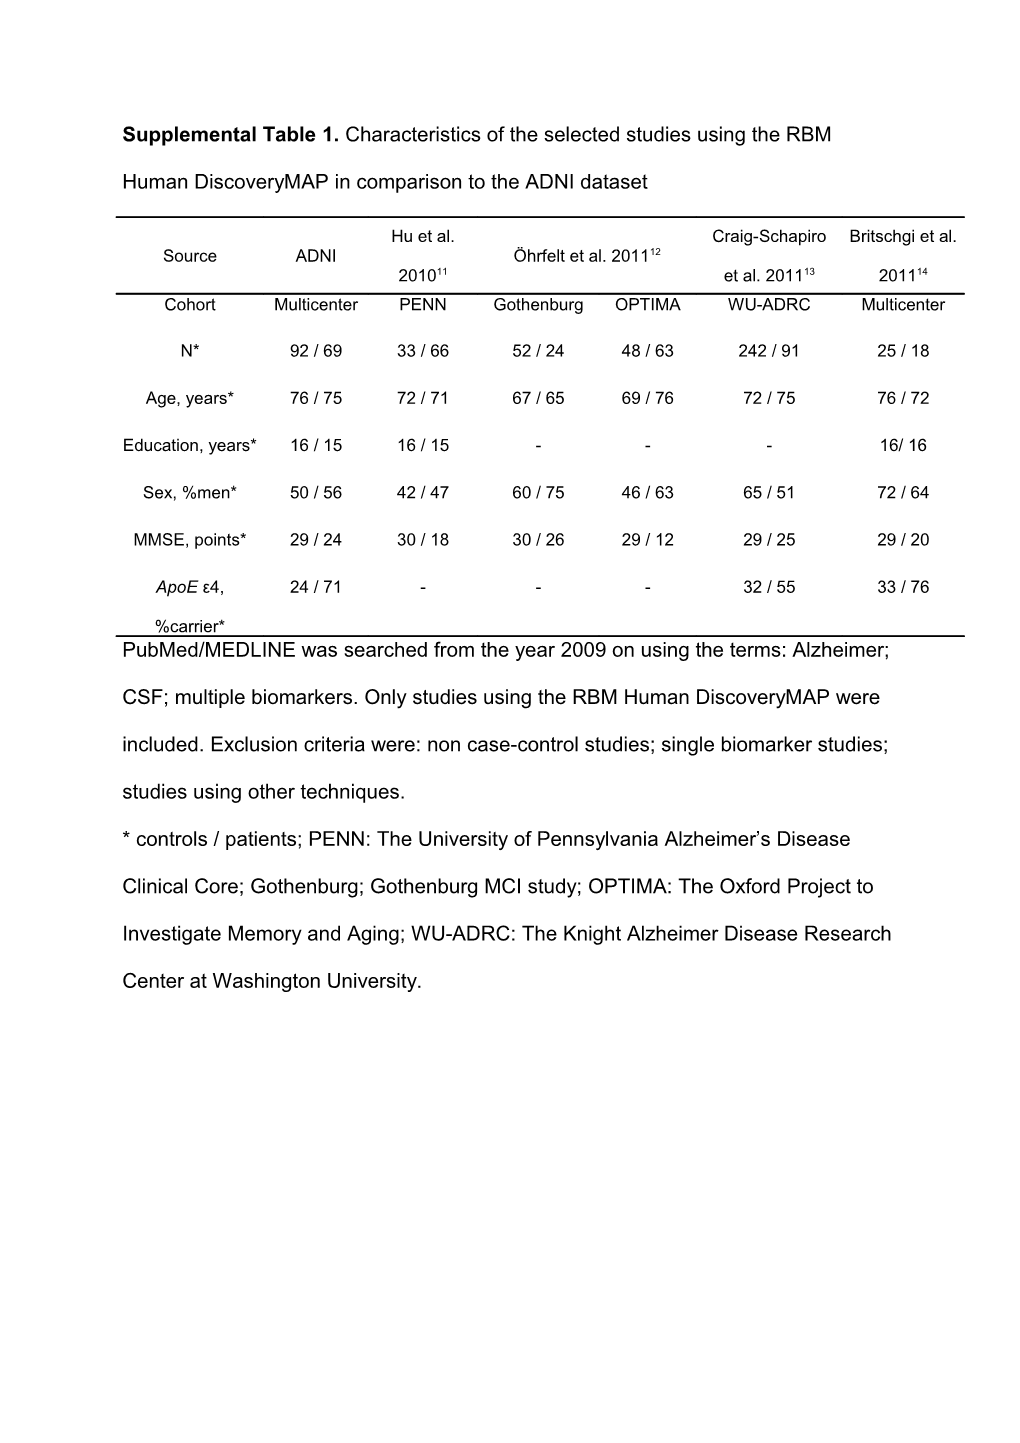 Supplemental Table 2. Individual Maximum Follow-Up Times of Patients with Mild Cognitive